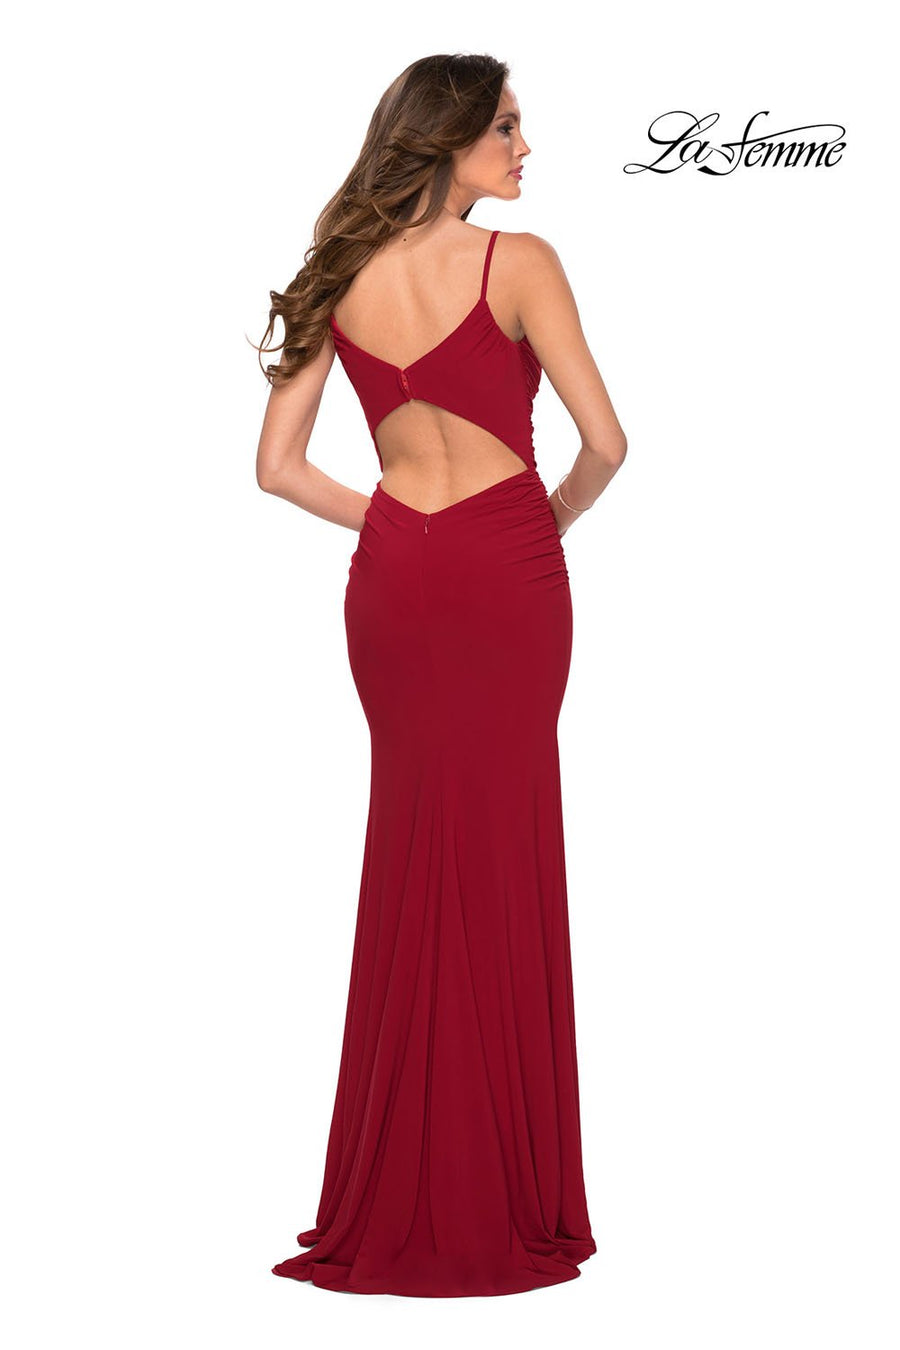 La Femme 29358 prom dress images.  La Femme 29358 is available in these colors: Black, Red.